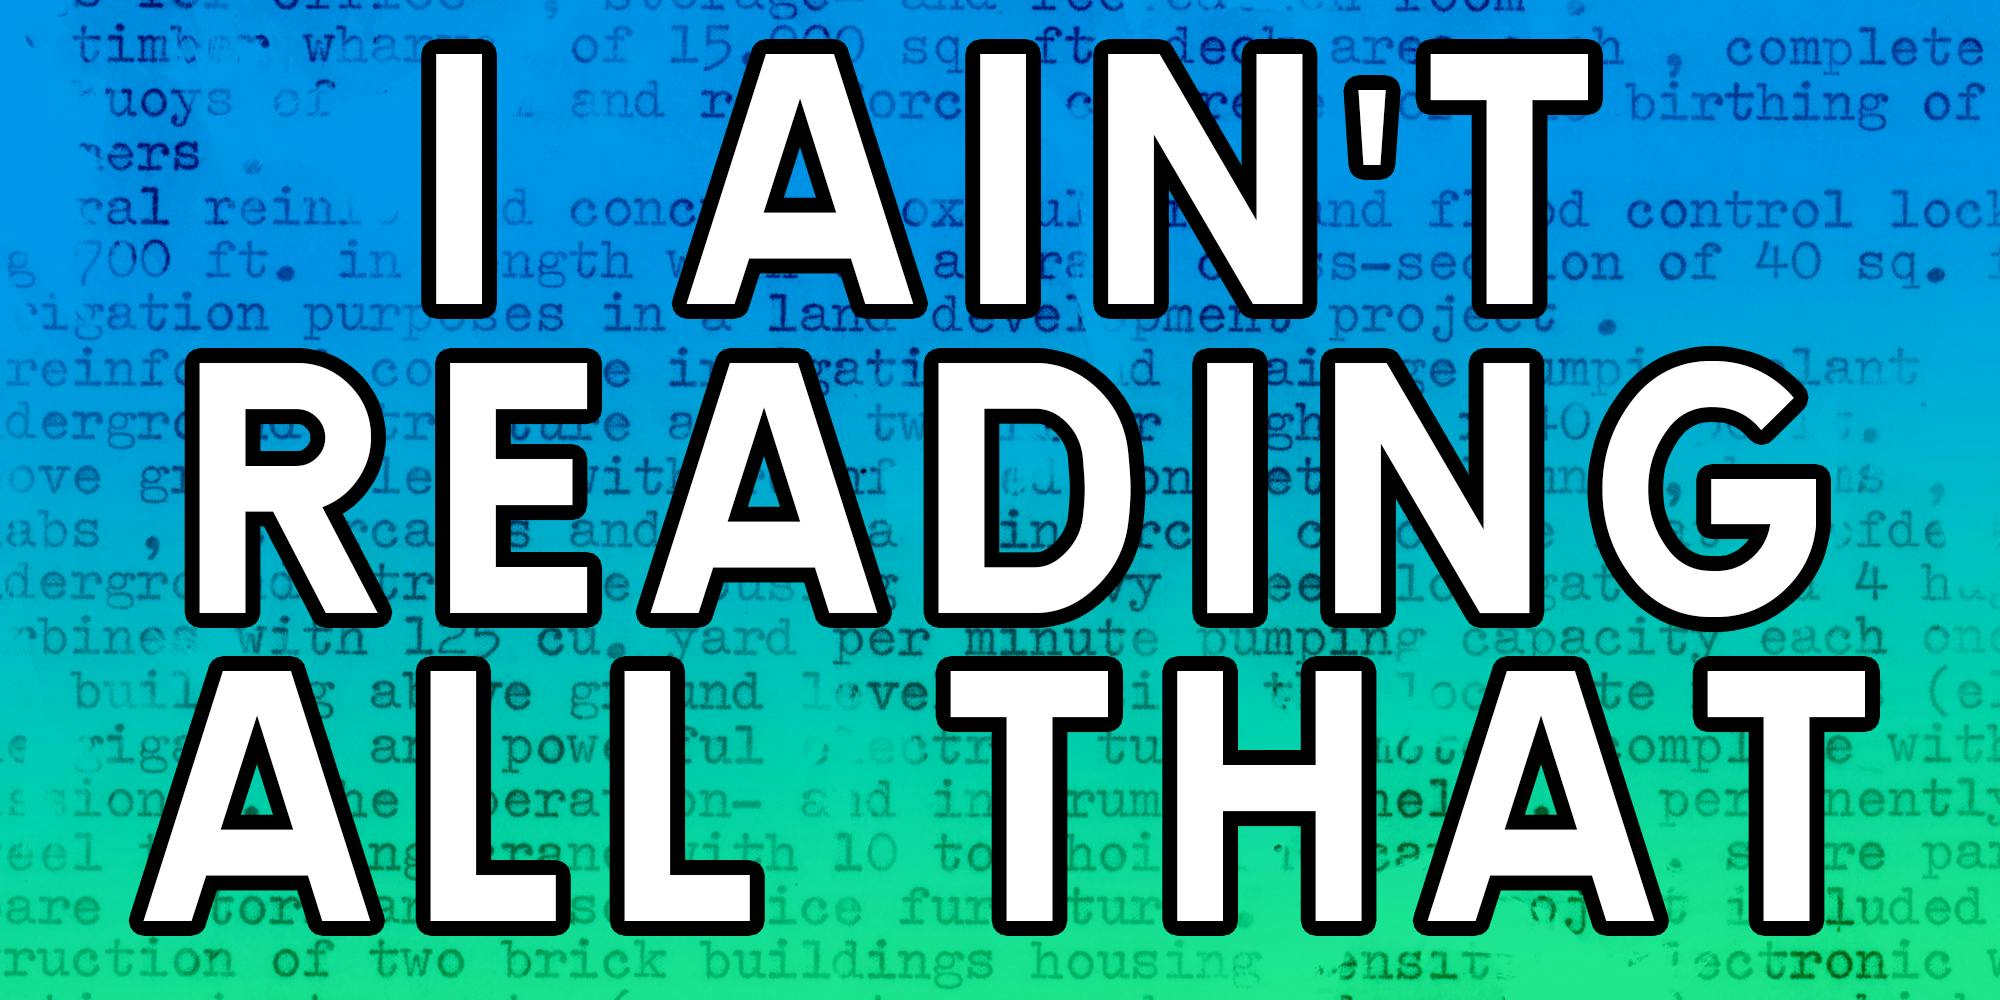 Text background with foreground that says "i ain't reading all that"